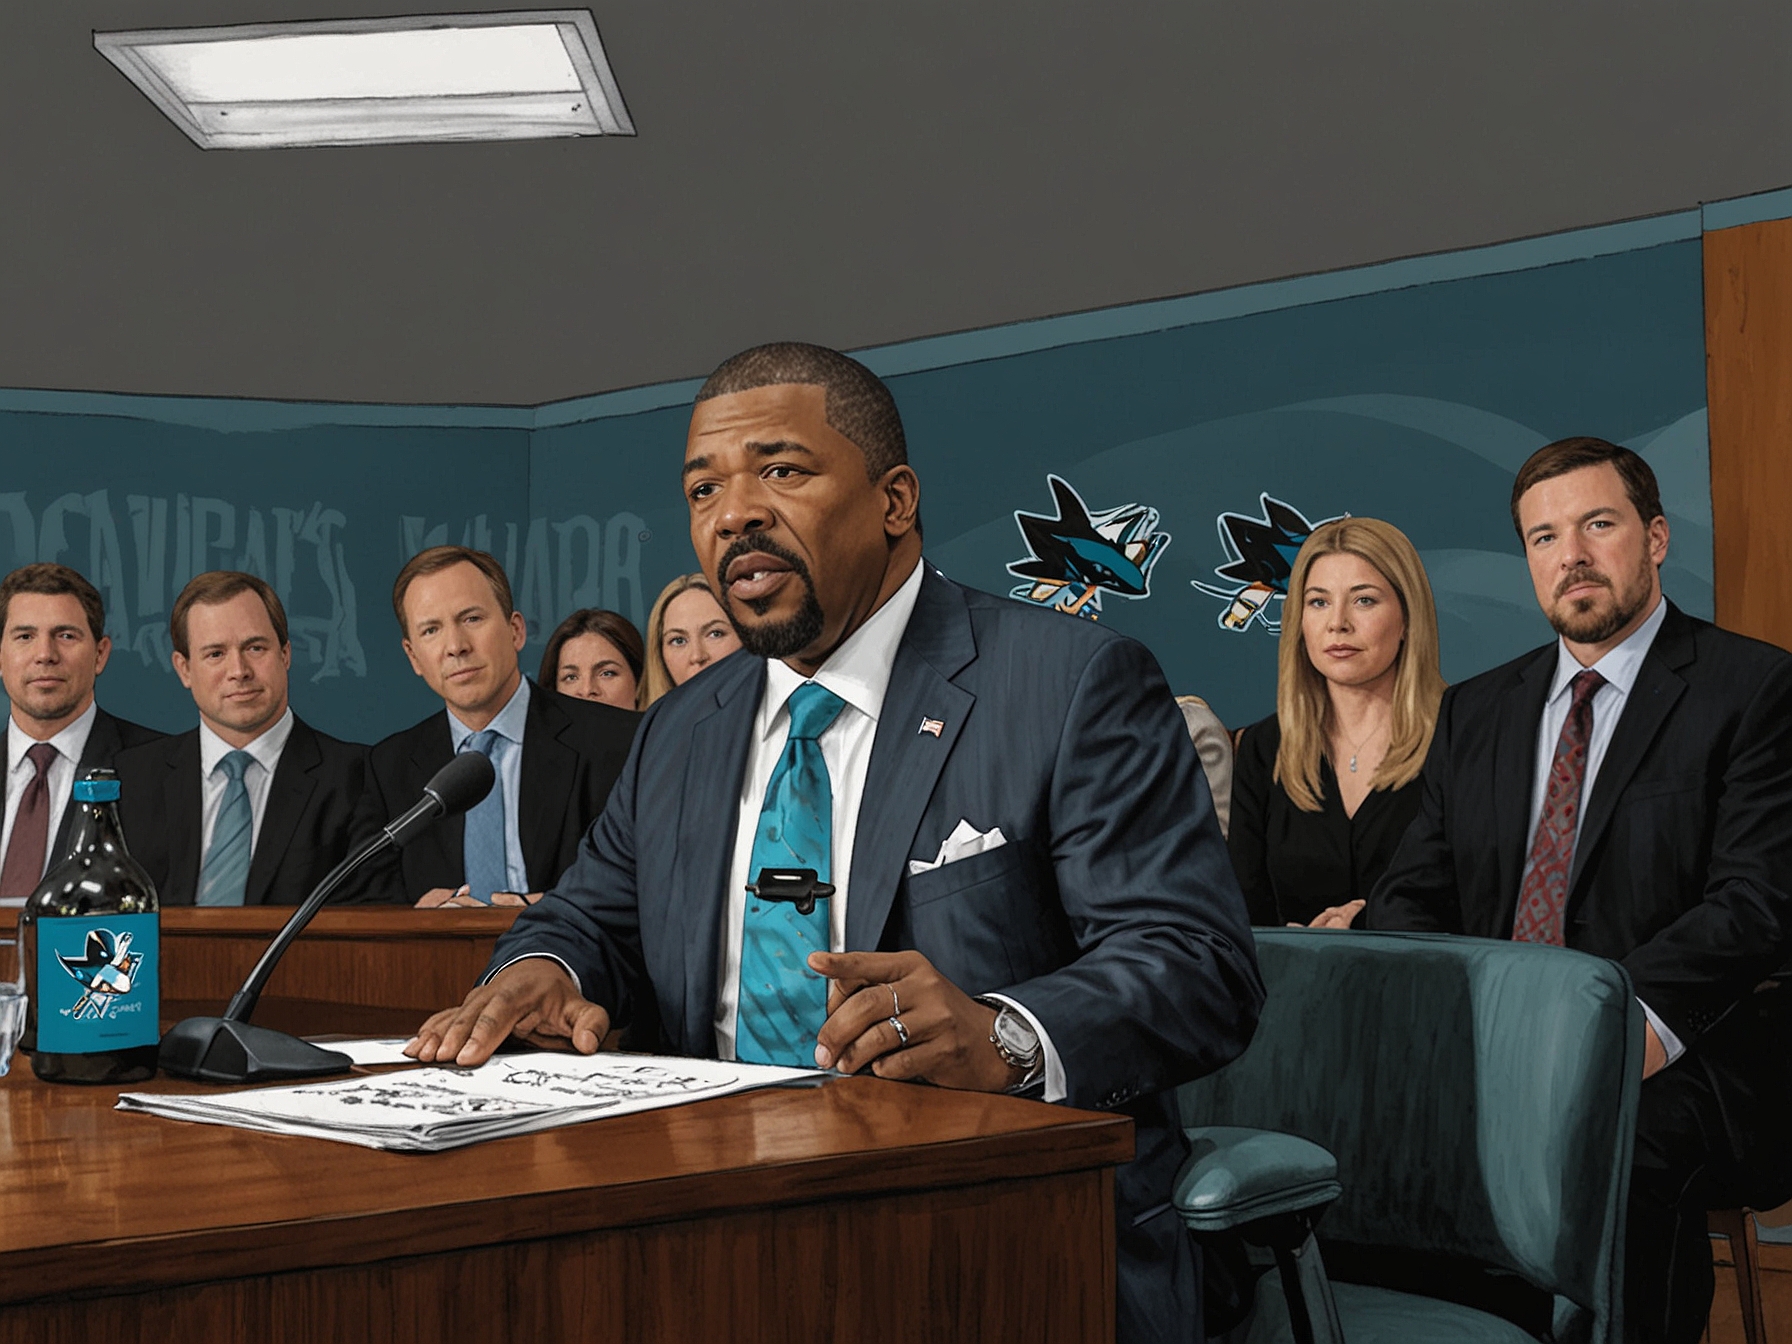 San Jose Sharks General Manager Mike Grier in a press conference, emphasizing his decision to retain team captain Logan Couture for his multifaceted contributions.